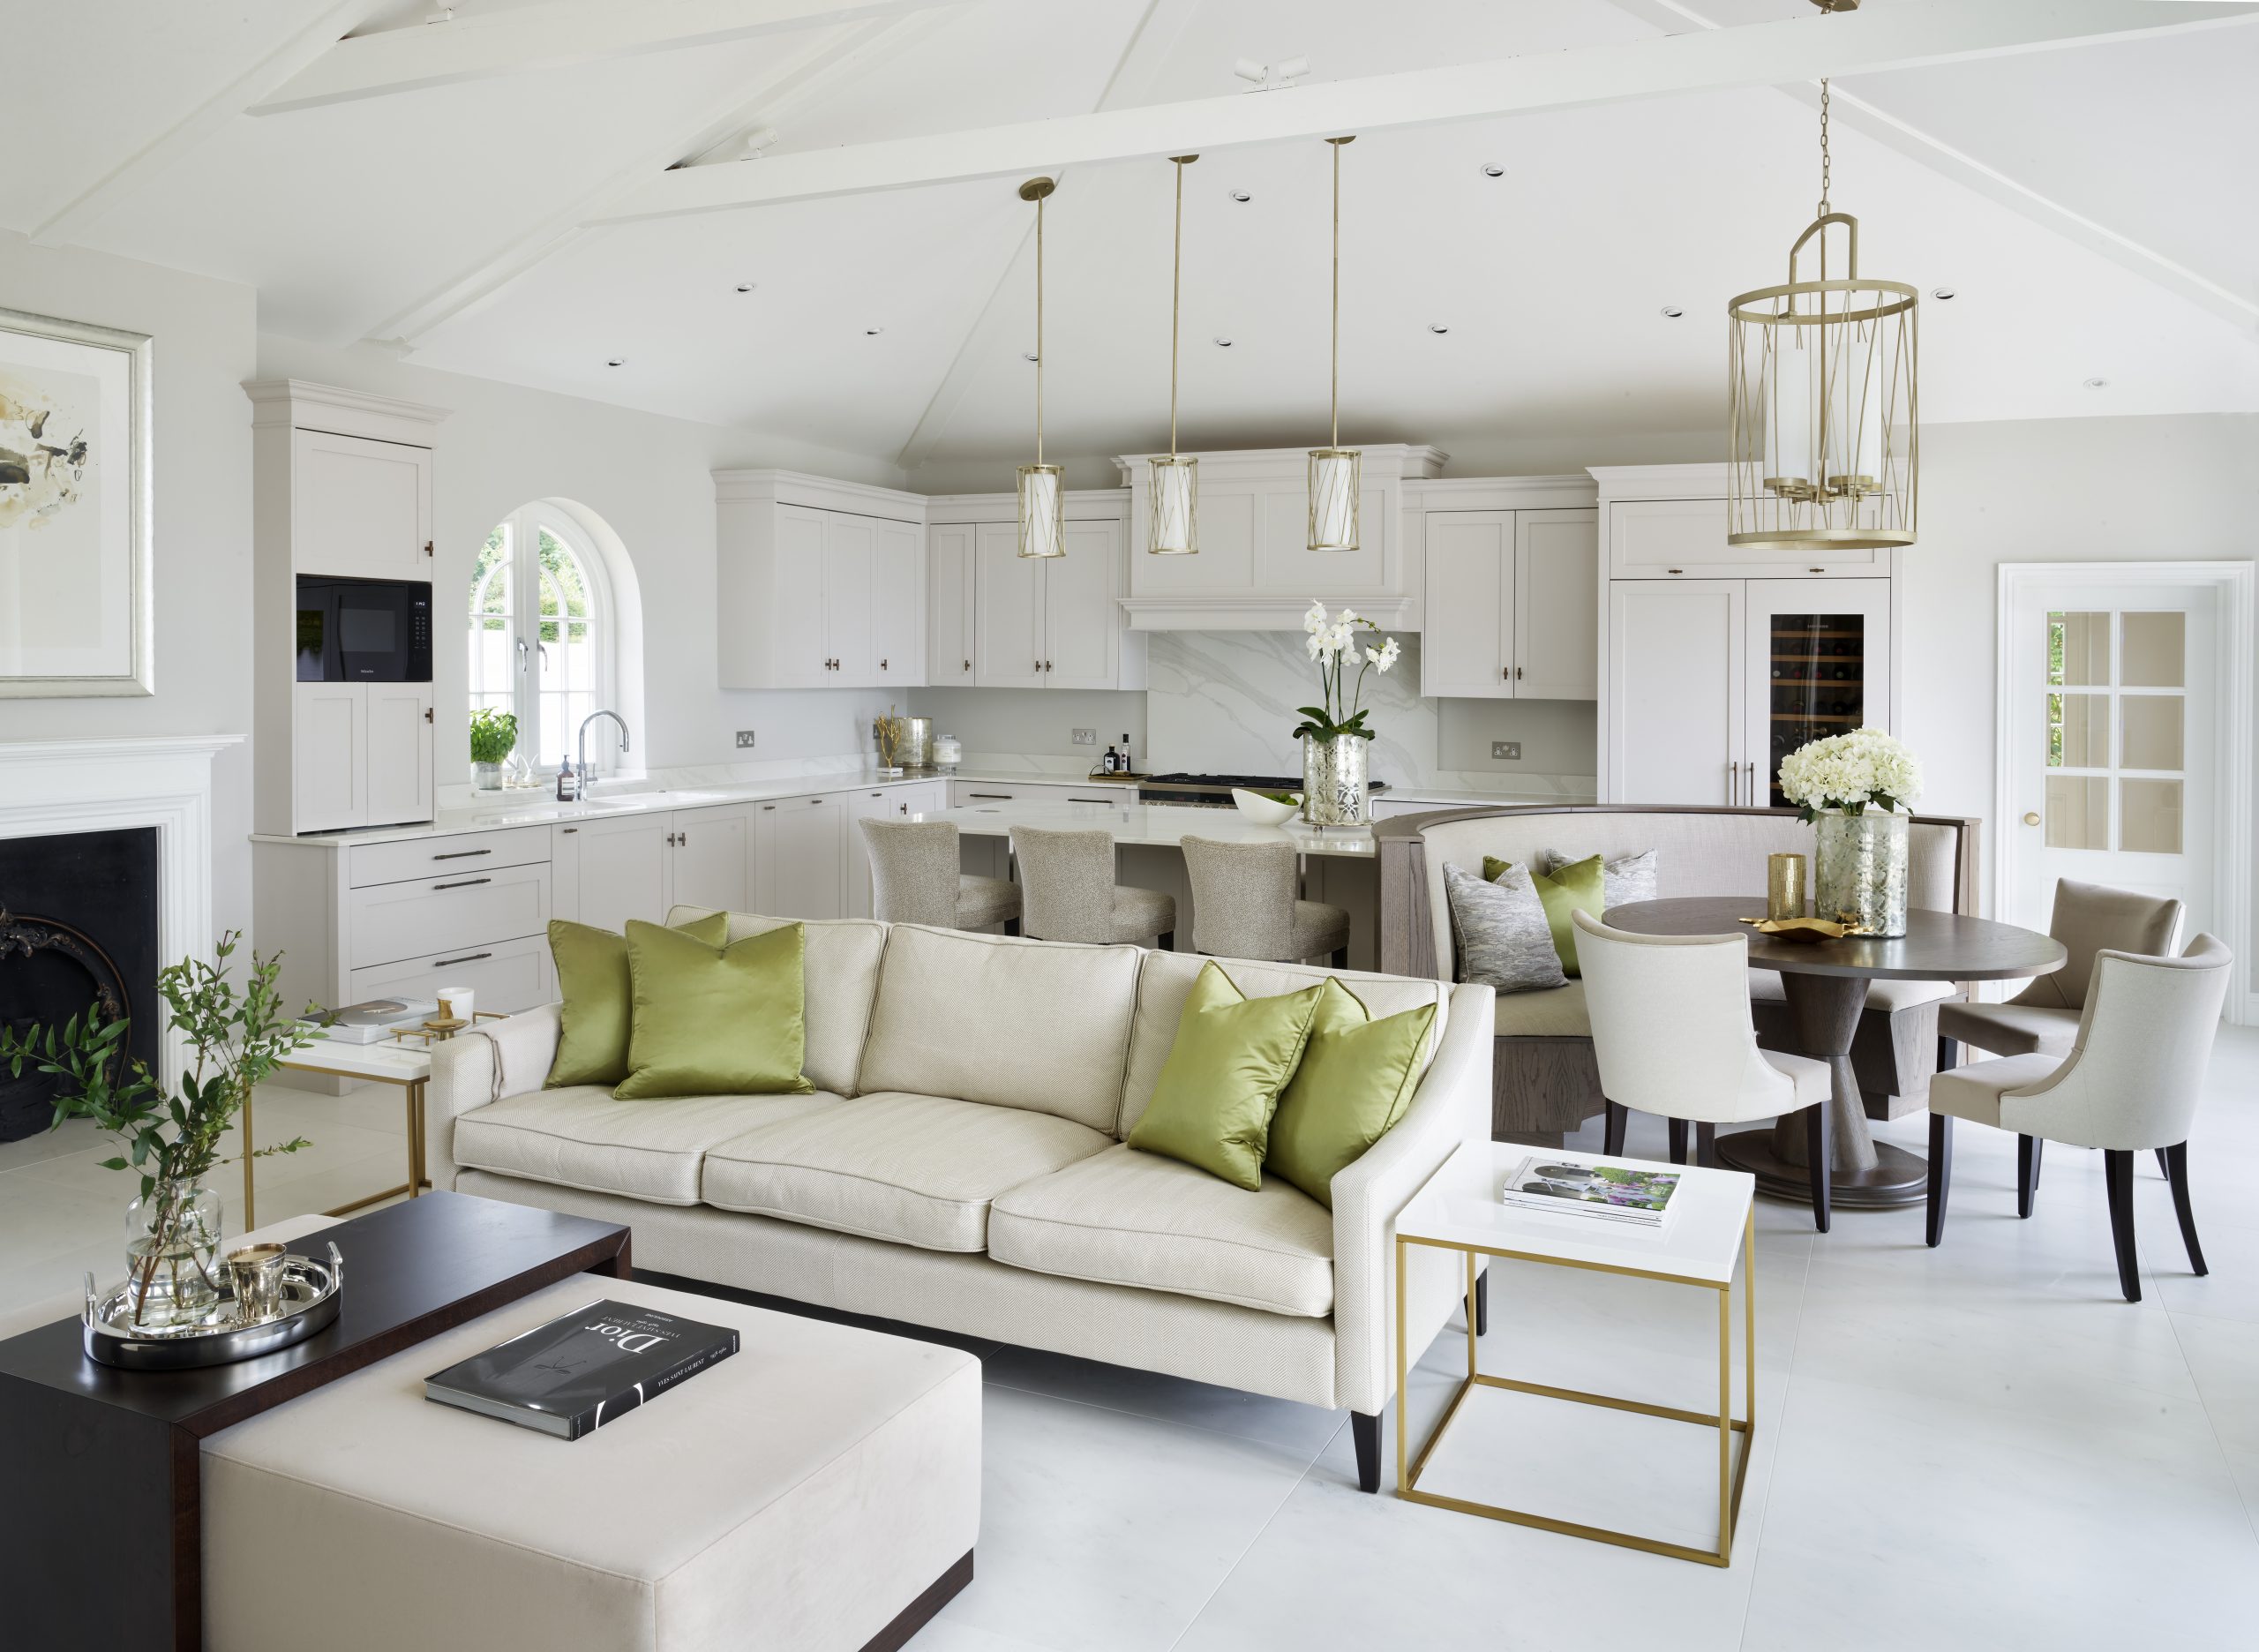 Neutral shaker luxury kitchen, open plan with banquette seating. 